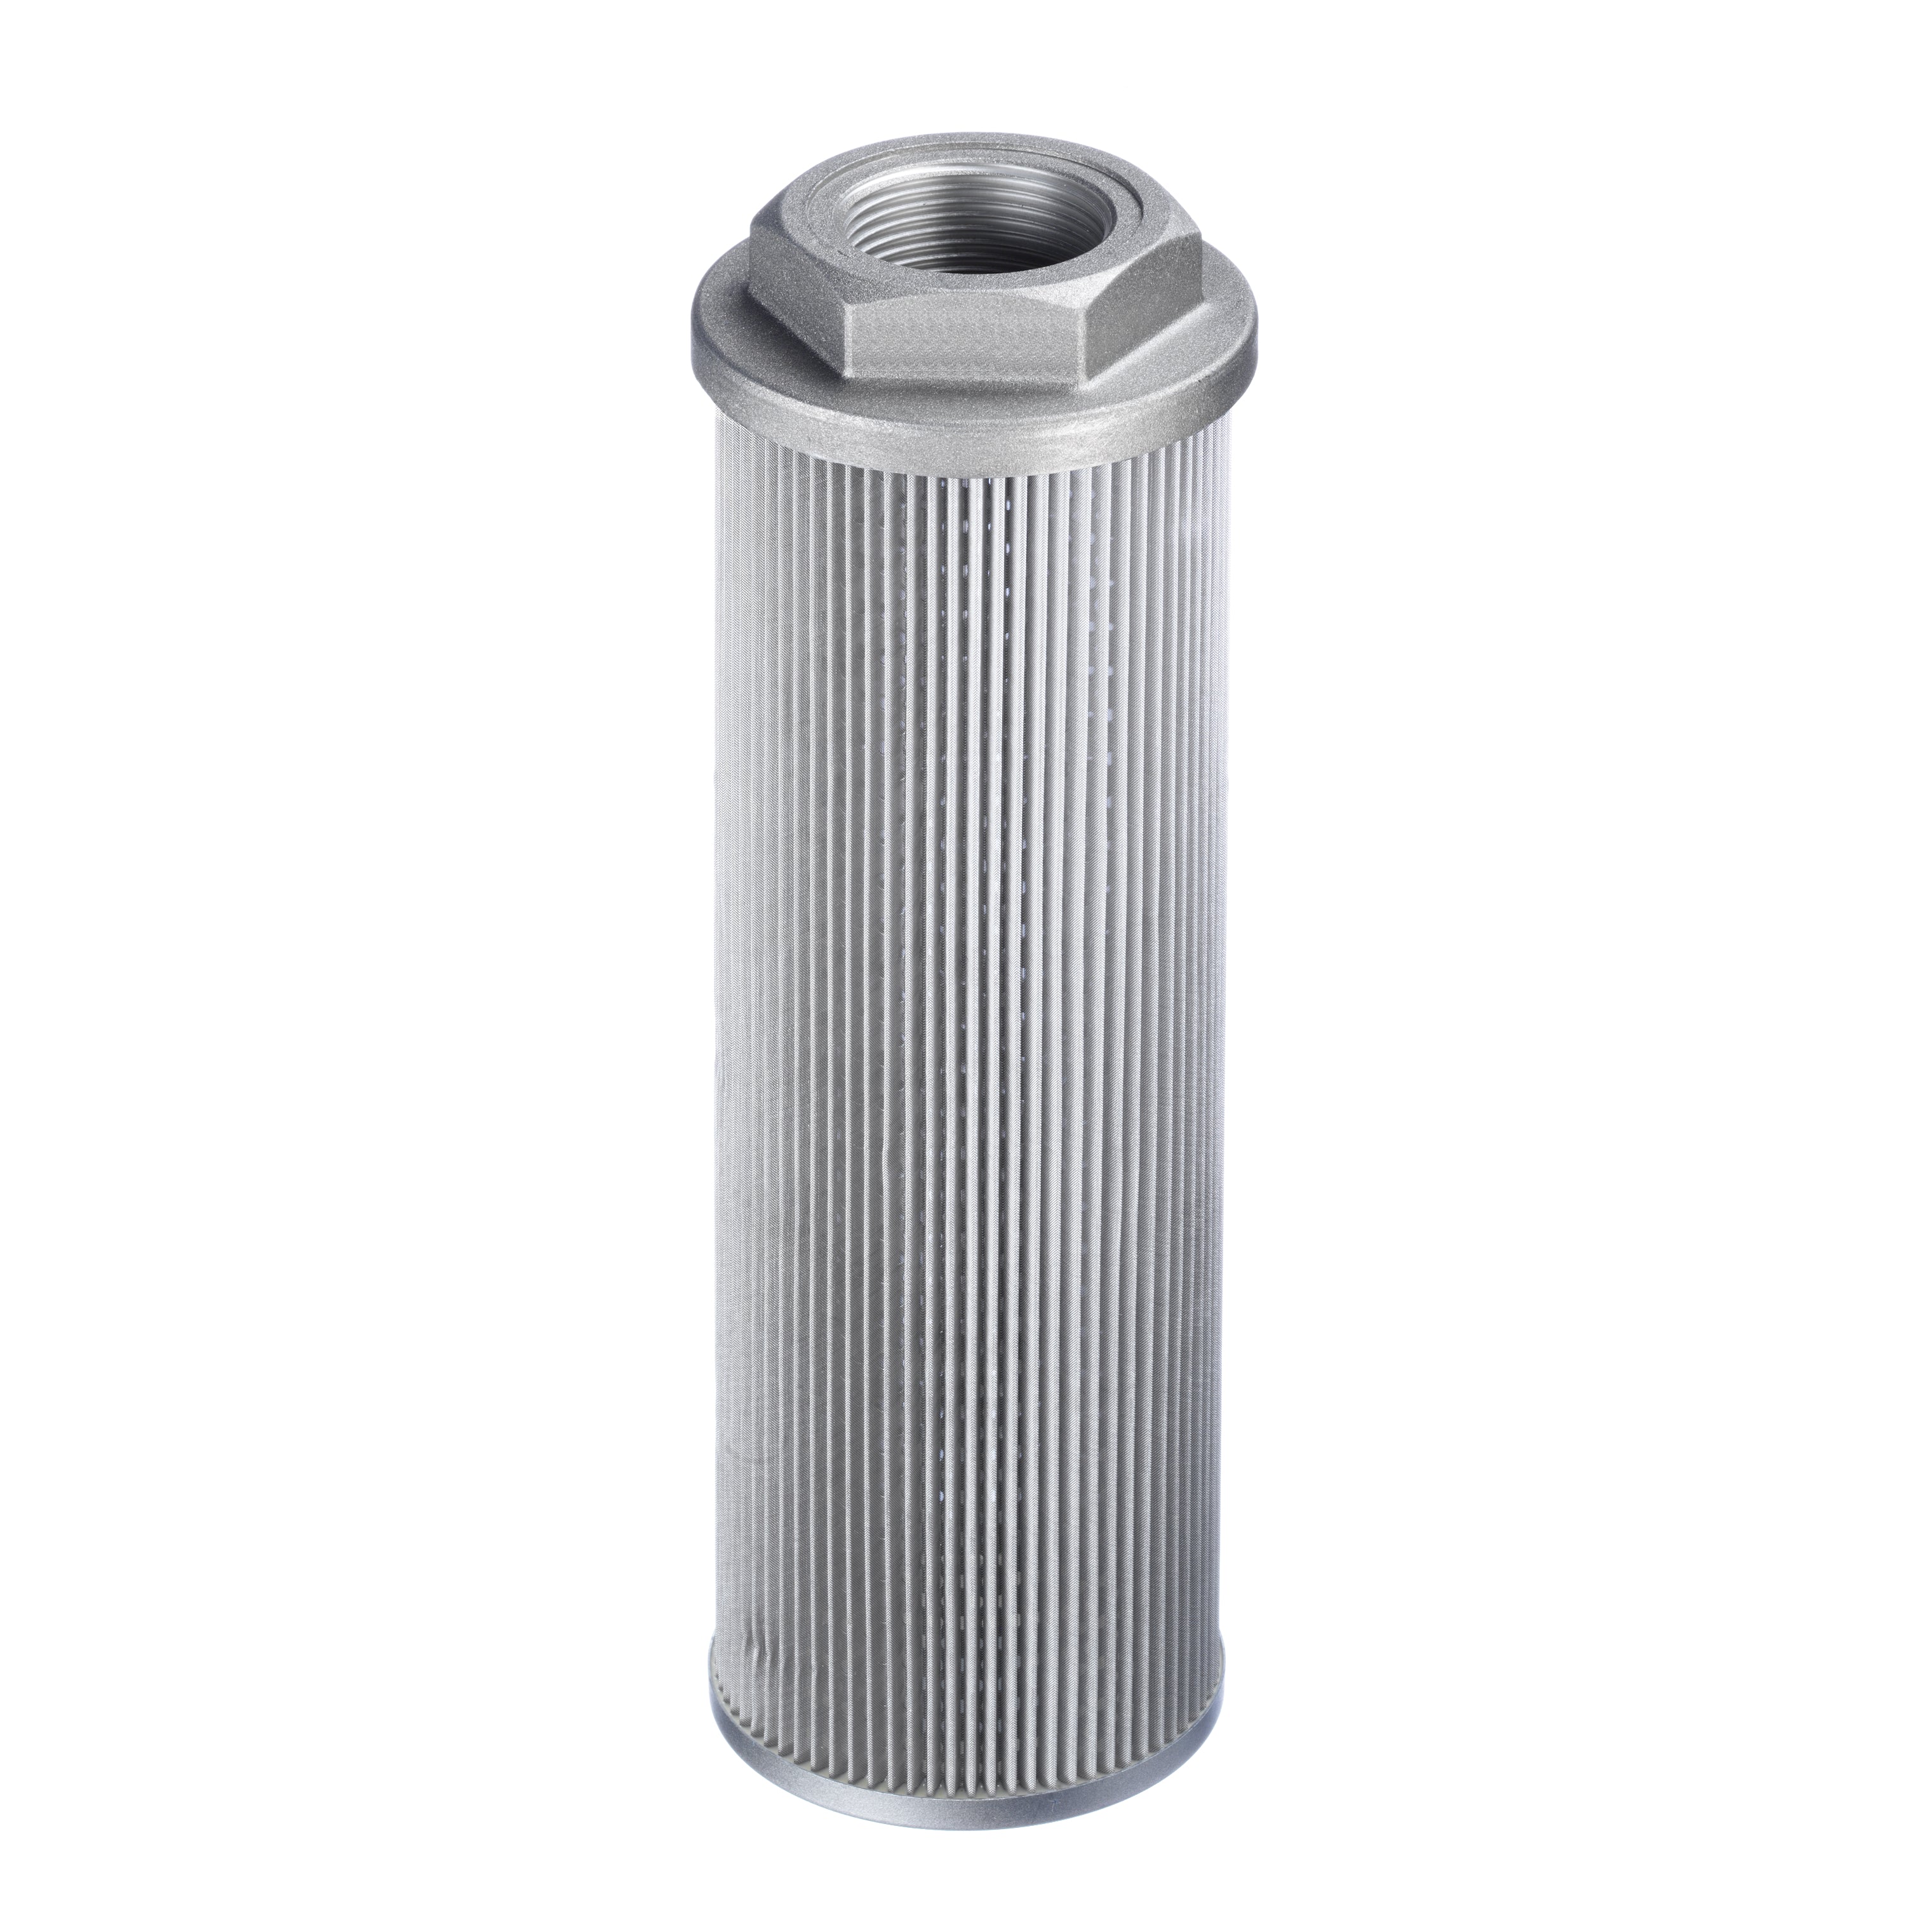 SUS-150-N48-272-250-A-O : Stauff Suction Strainer, Aluminum End Cap, 3" NPT, 104GPM, 250 Micron, No Bypass